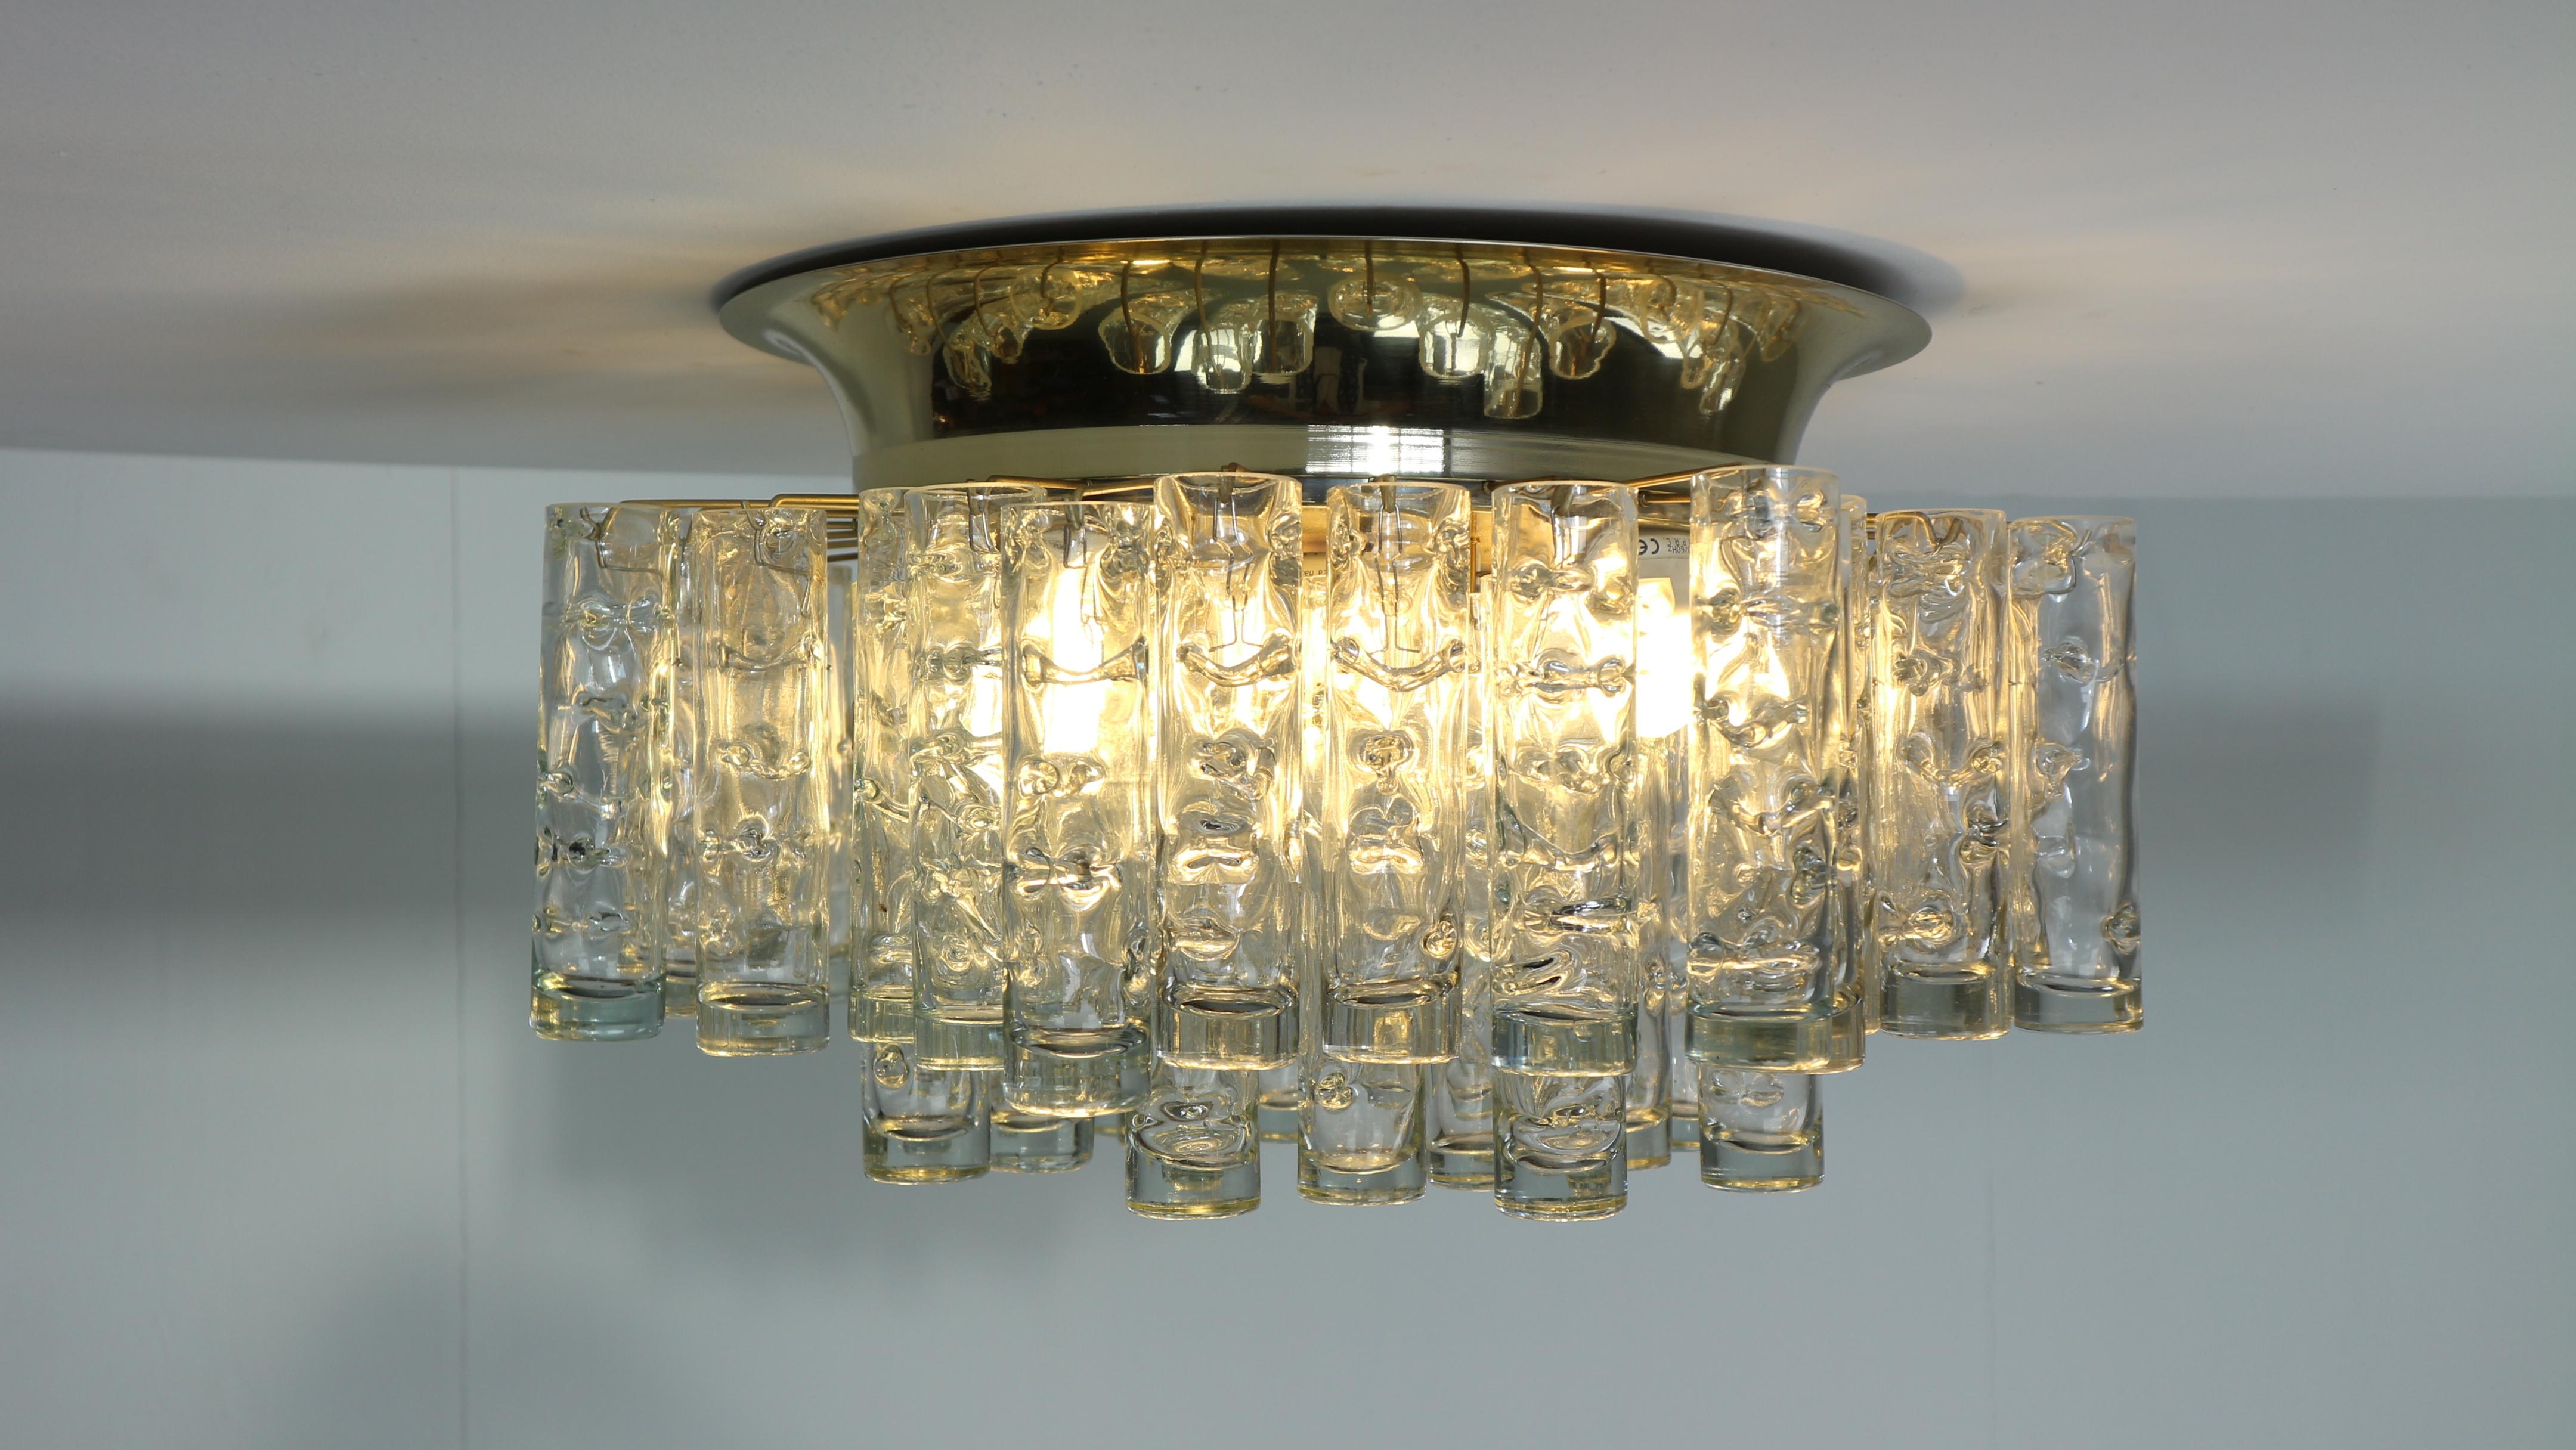 Fantastic midcentury chandelier by Doria, Germany, manufactured in the 1960s. 49 Murano glass cylinders suspended from the fixture.

Heavy quality and in very good condition. Cleaned, well-wired and ready to use. The fixture requires five E27